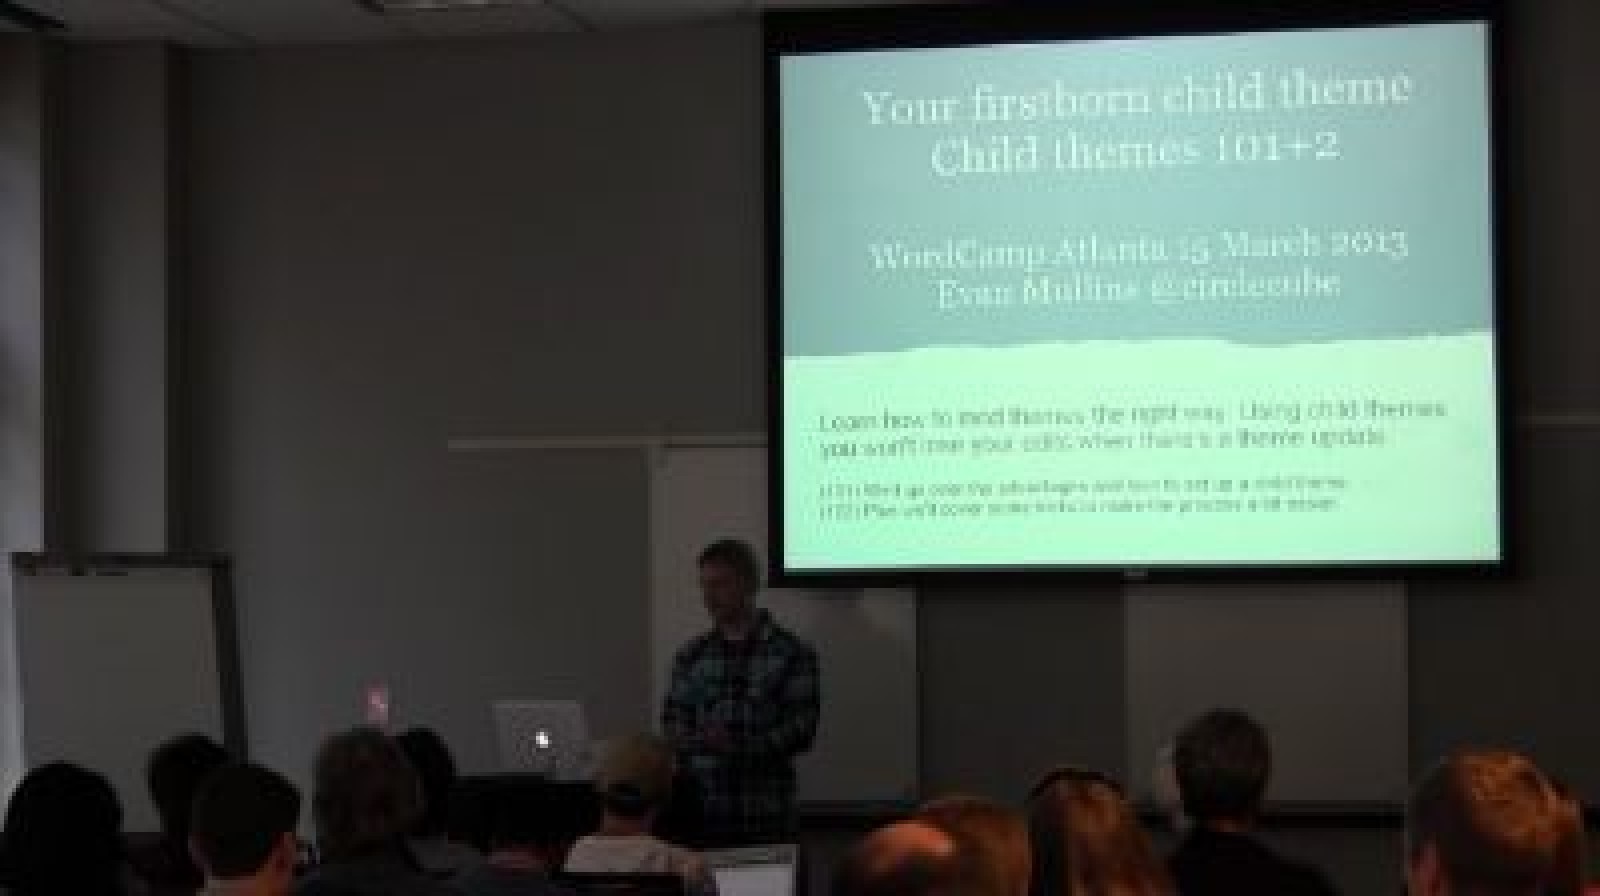 Your firstborn child theme. Child themes 101+2